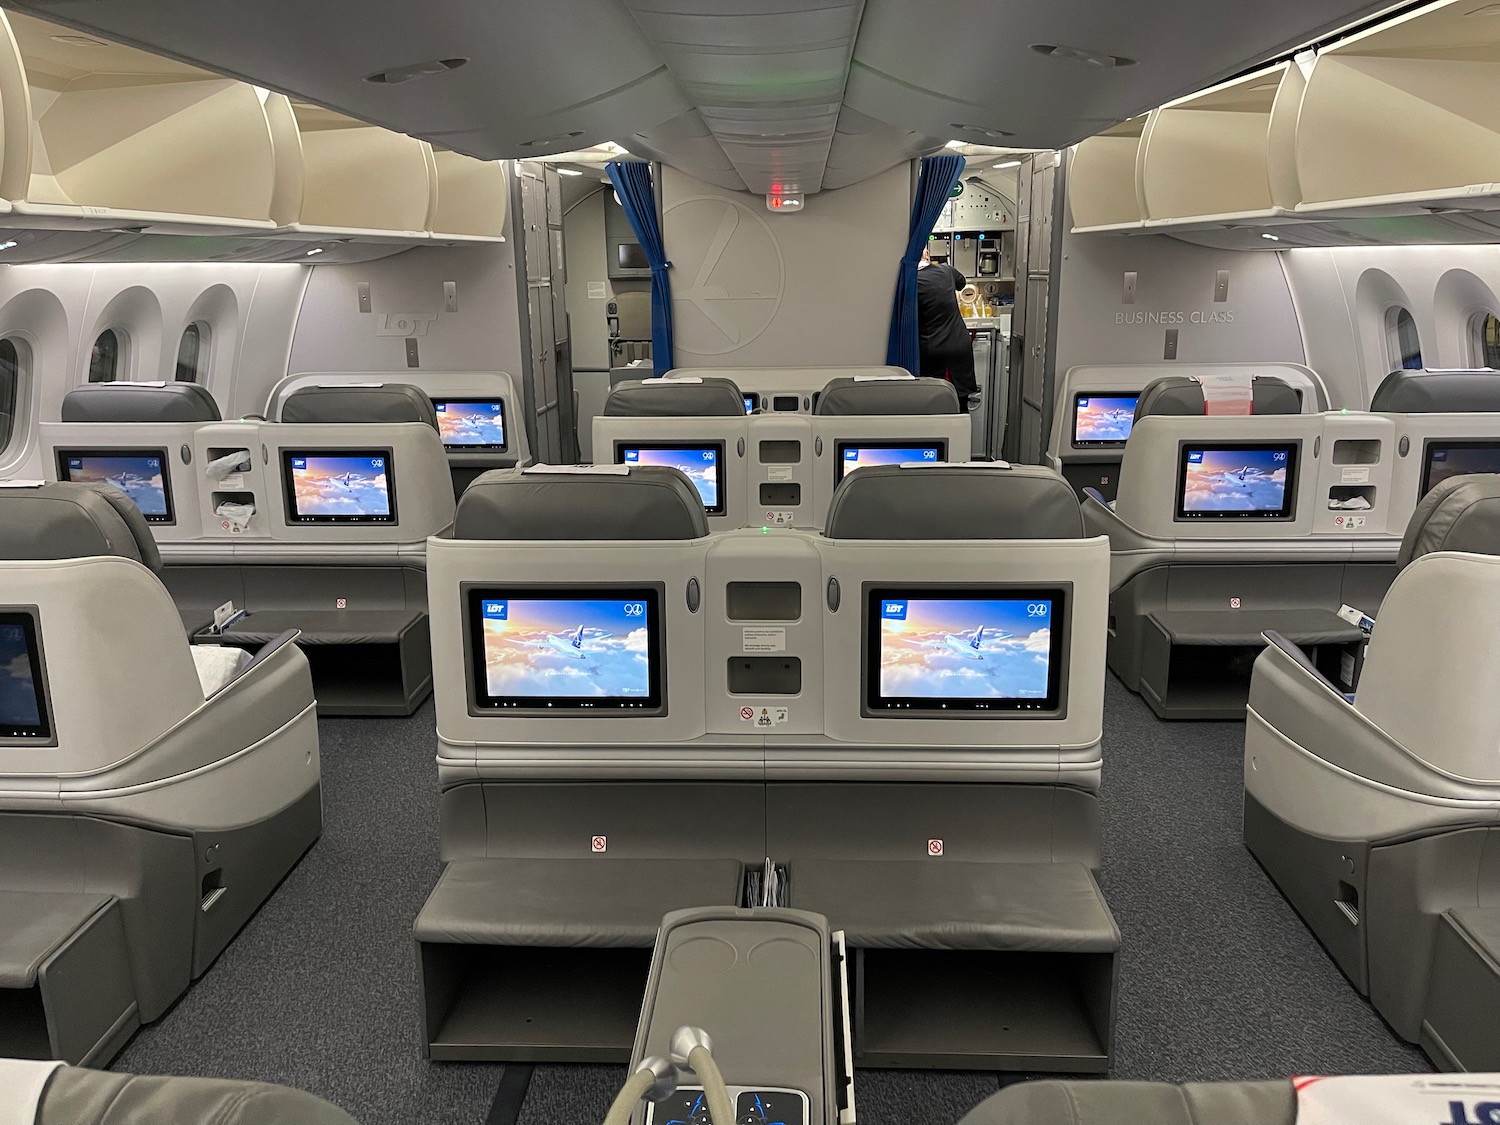 a row of seats with monitors in the middle of an airplane